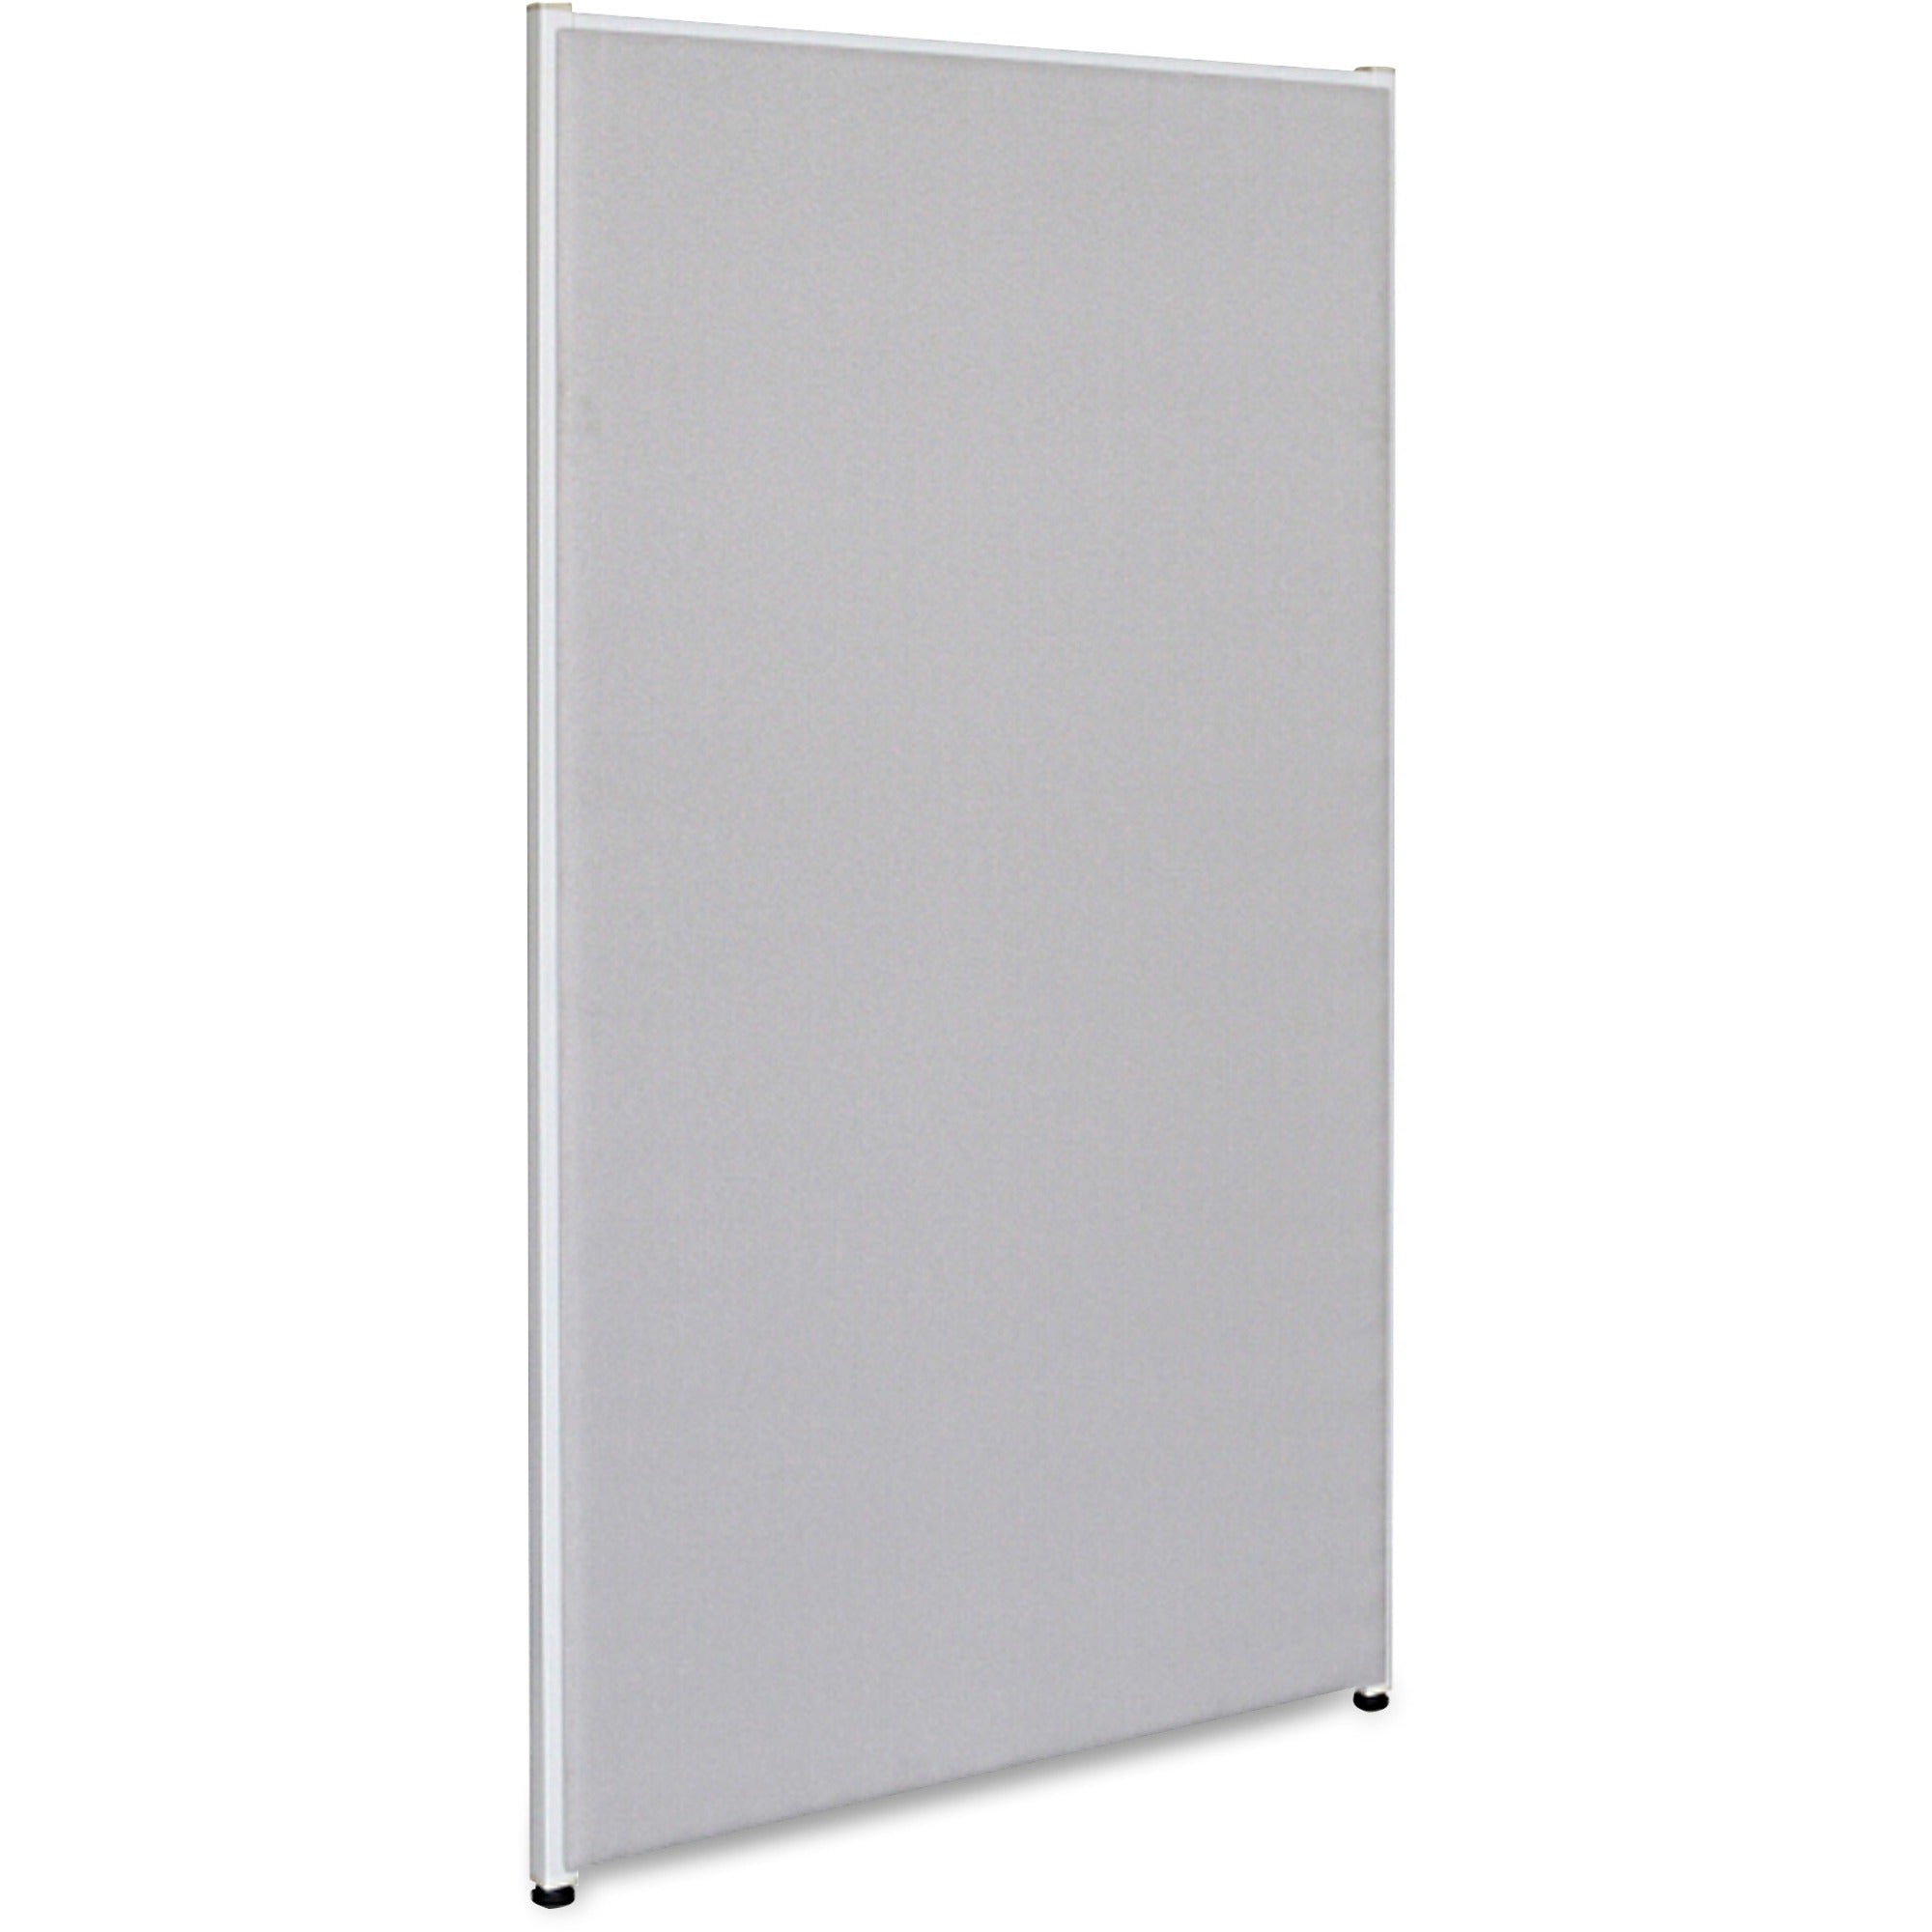 Lorell Panel System Partition Fabric Panel - 36.4" Width x 71" Height - Steel Frame - Gray - 1 Each - 